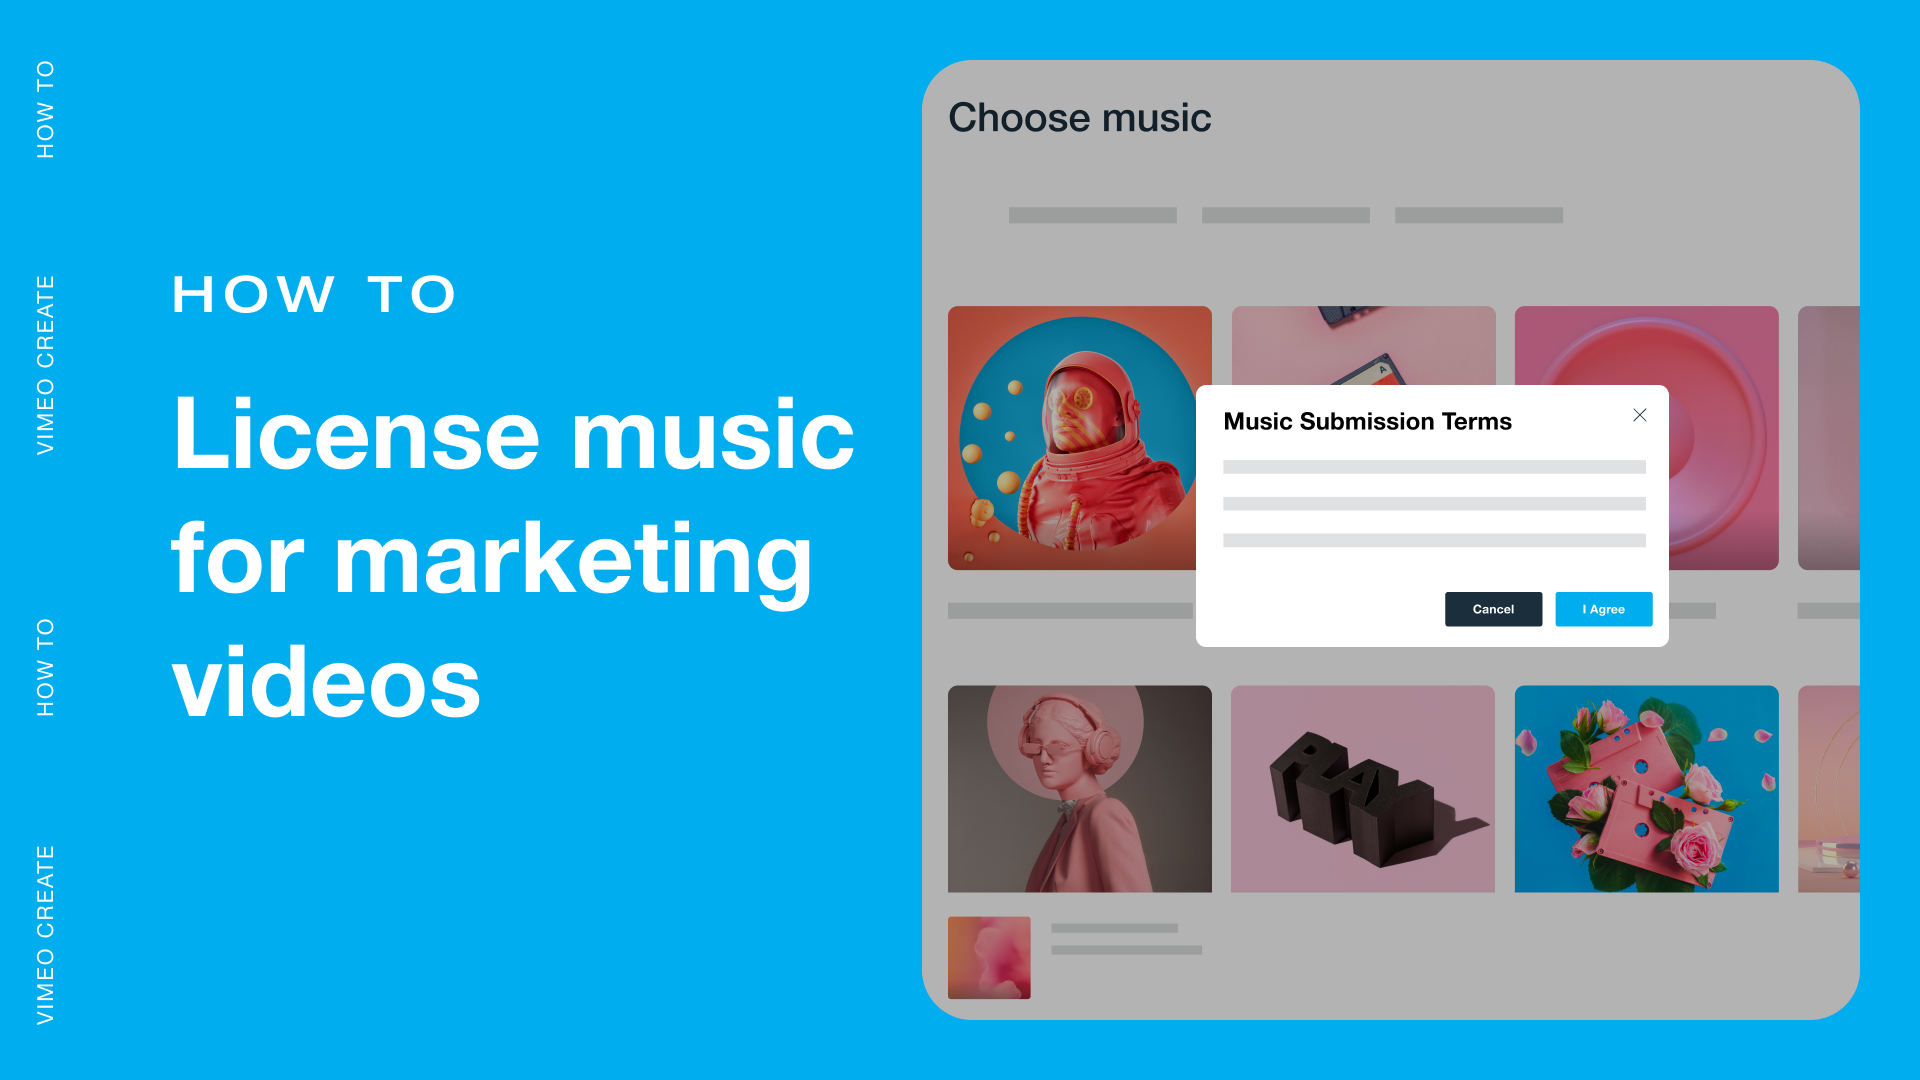 How to license music for marketing videos